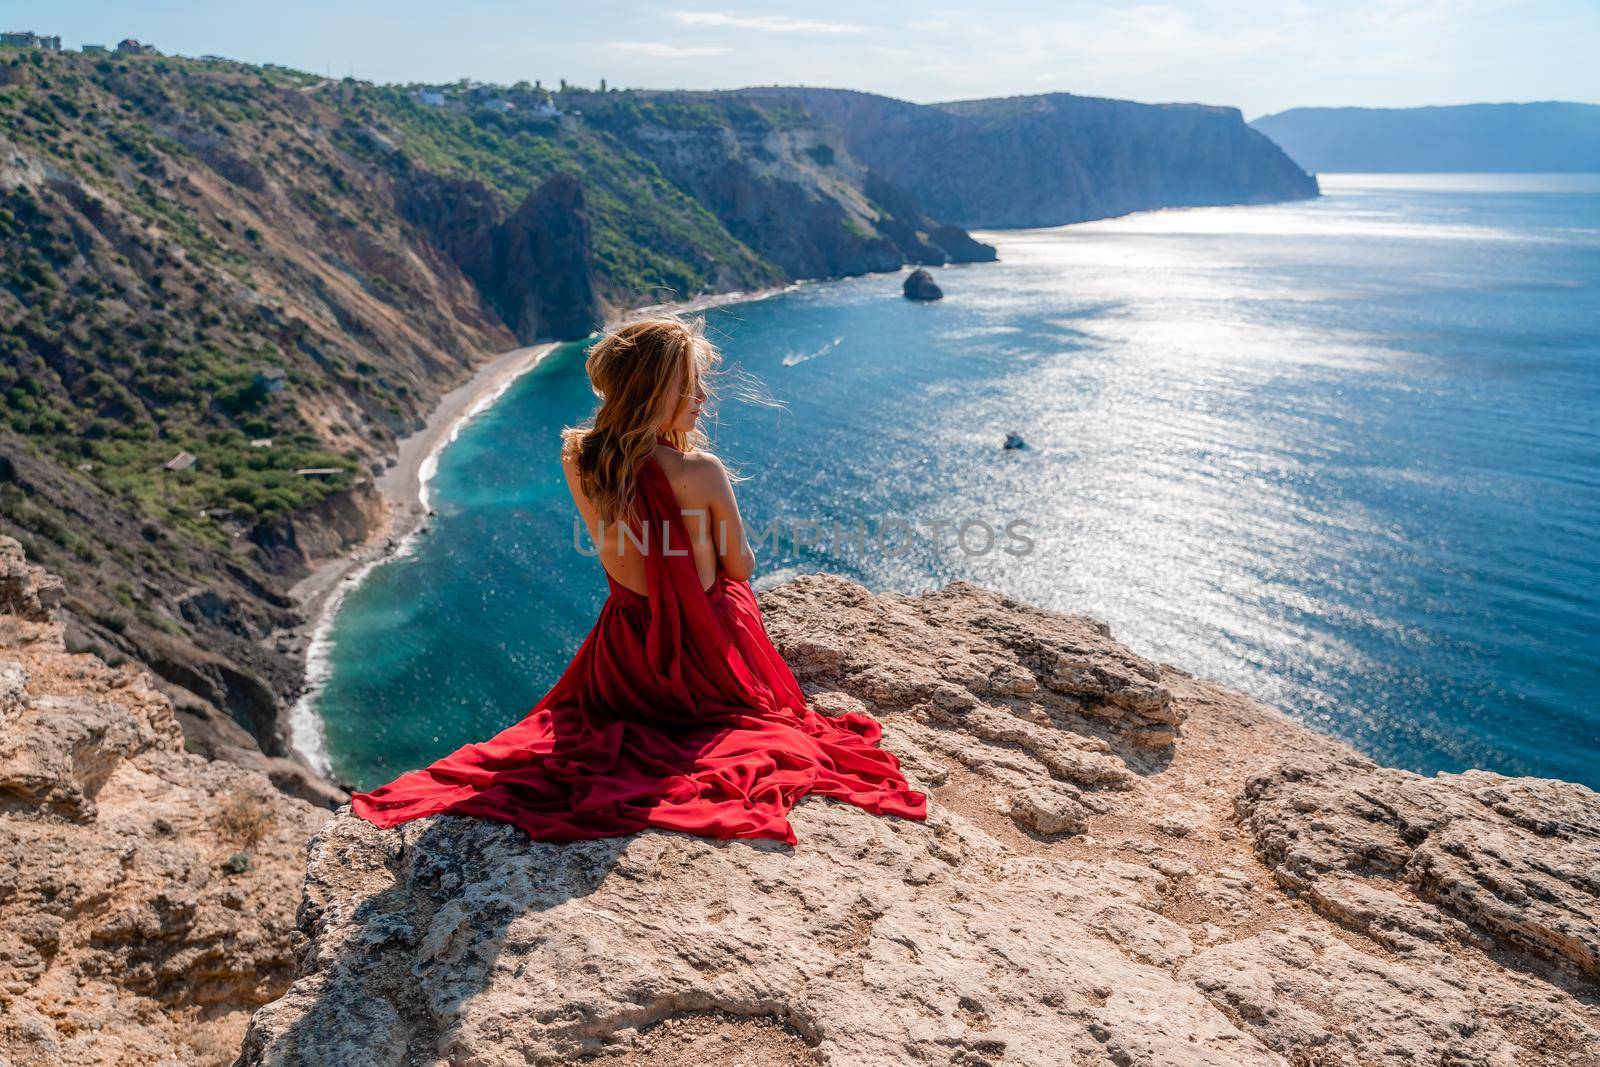 A girl with flowing hair in a long red dress sits on a rock above the sea. The stone can be seen in the sea